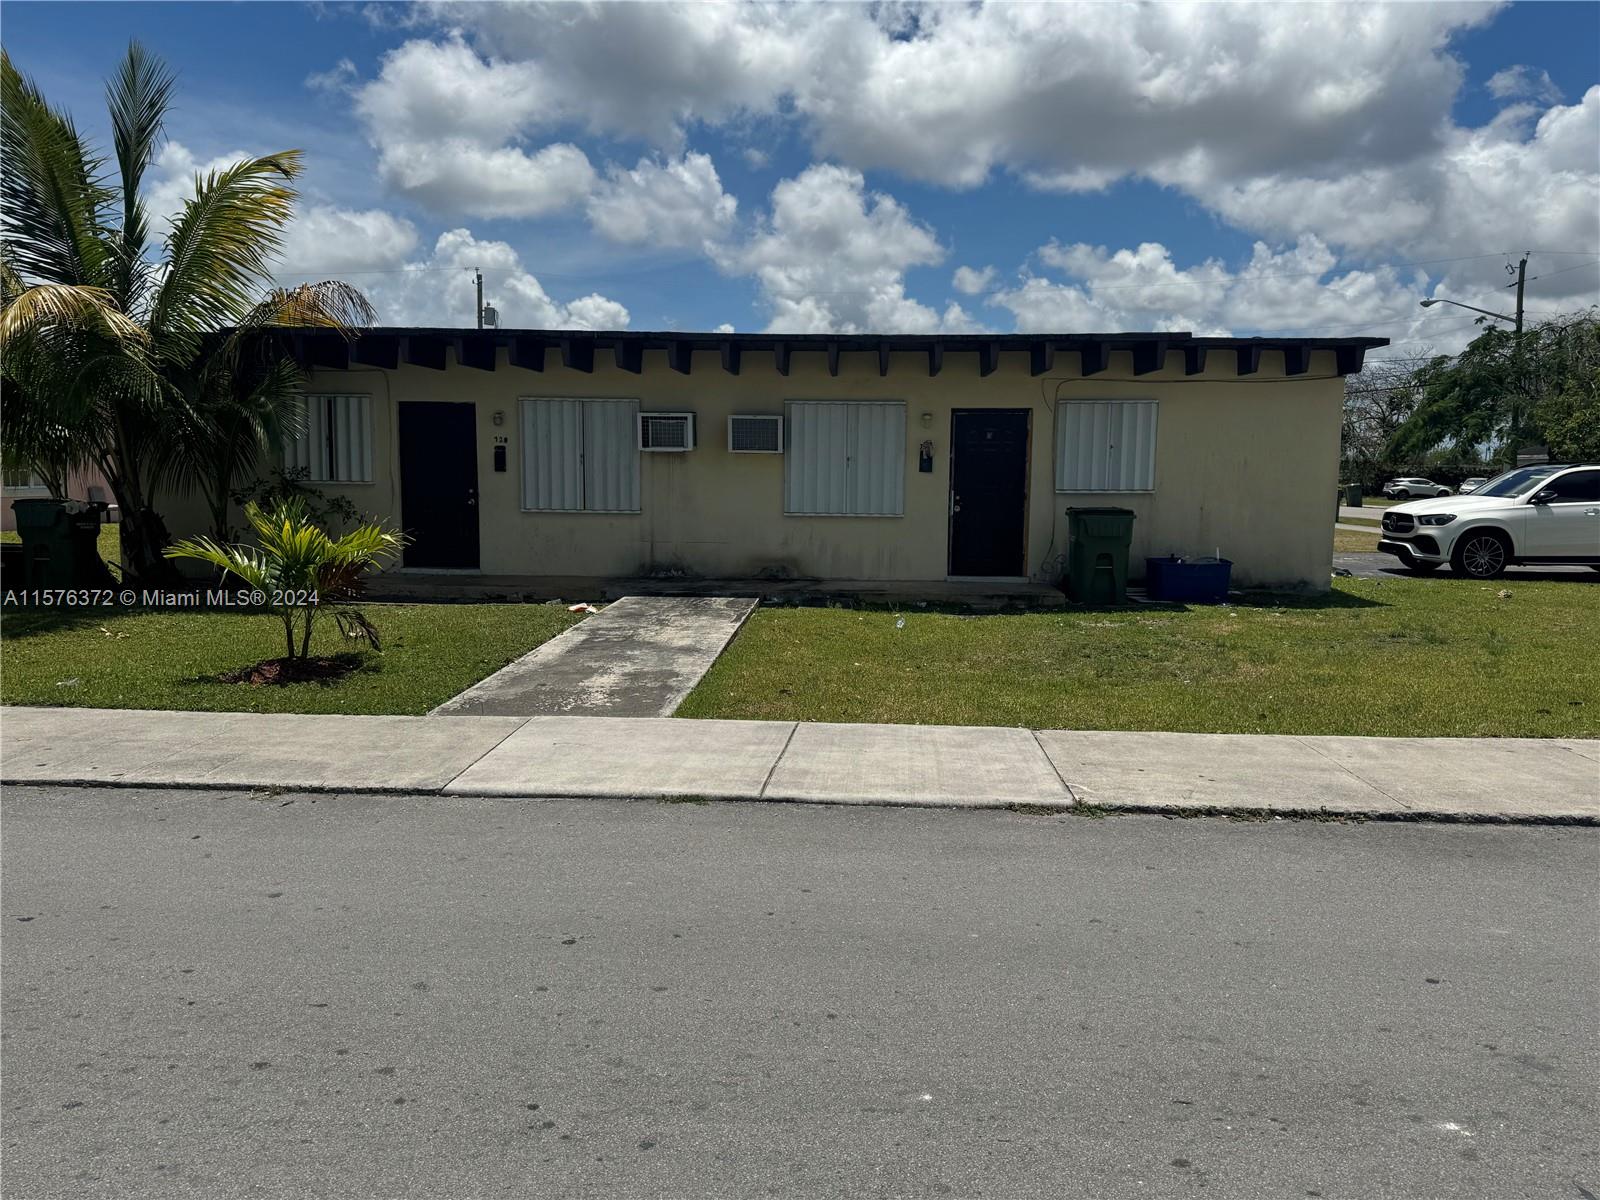 Rental Property at 720 Sw 6th St St, Homestead, Miami-Dade County, Florida -  - $480,000 MO.